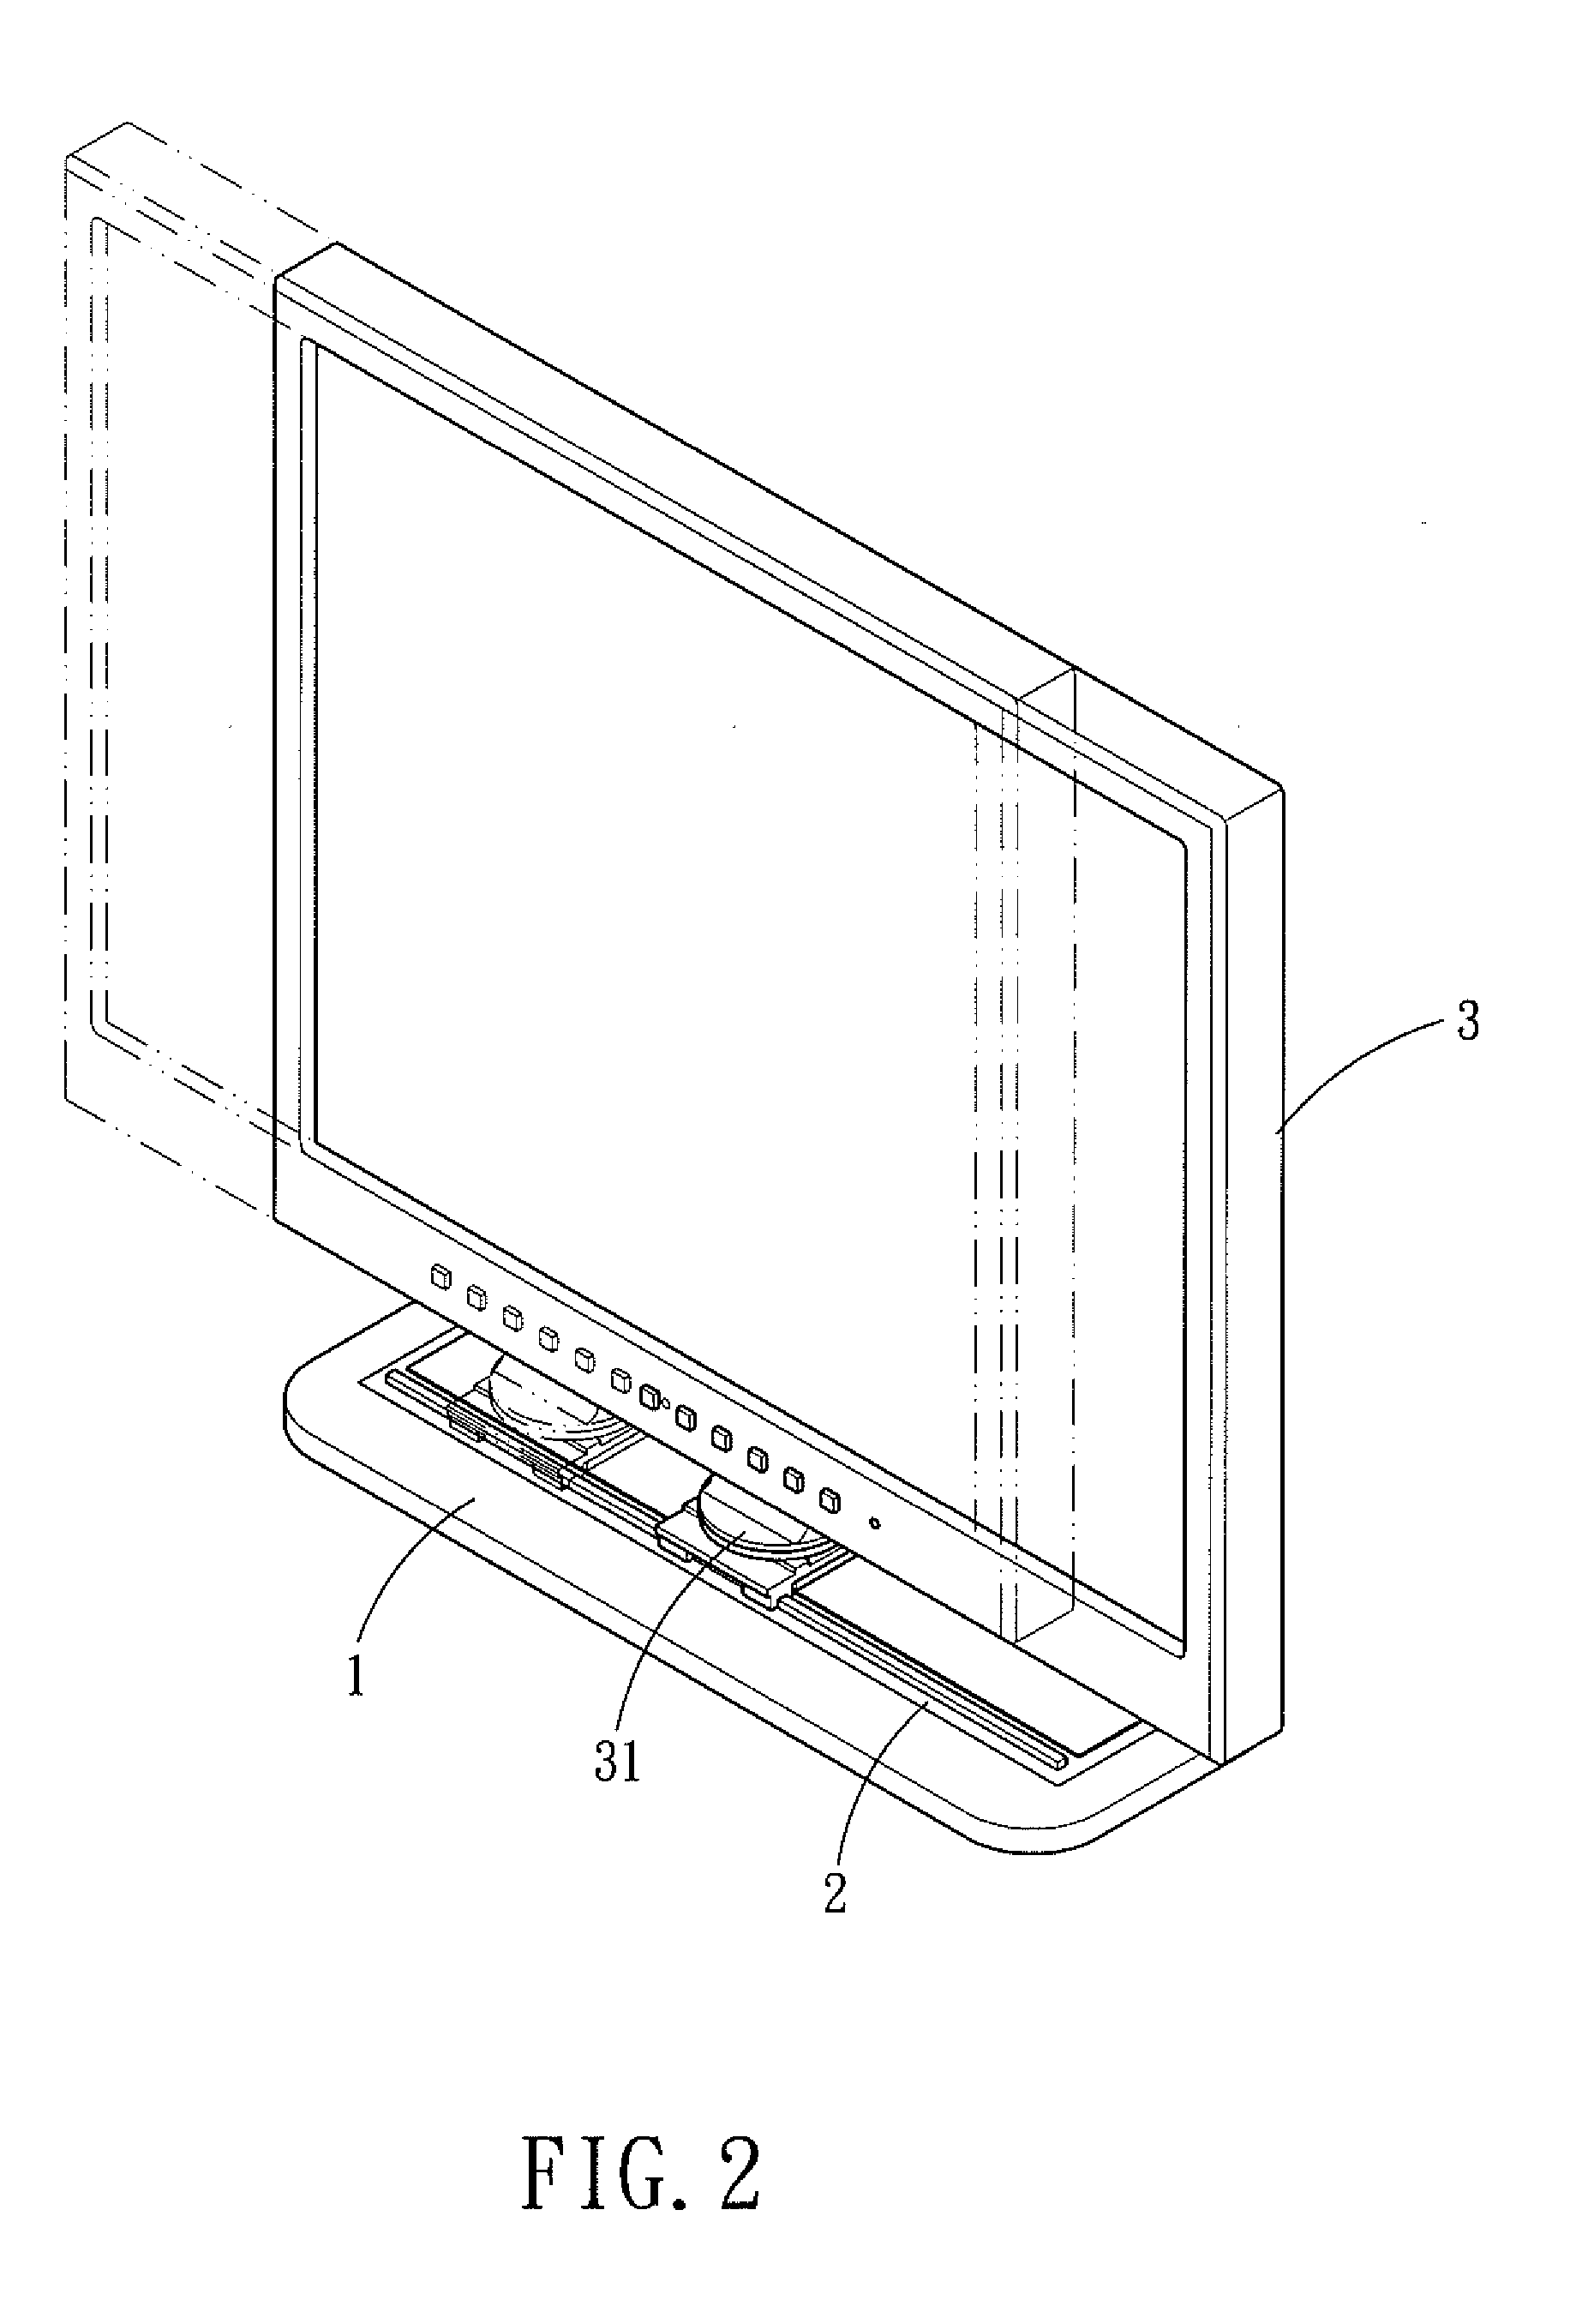 Display with a Linear Driving Device